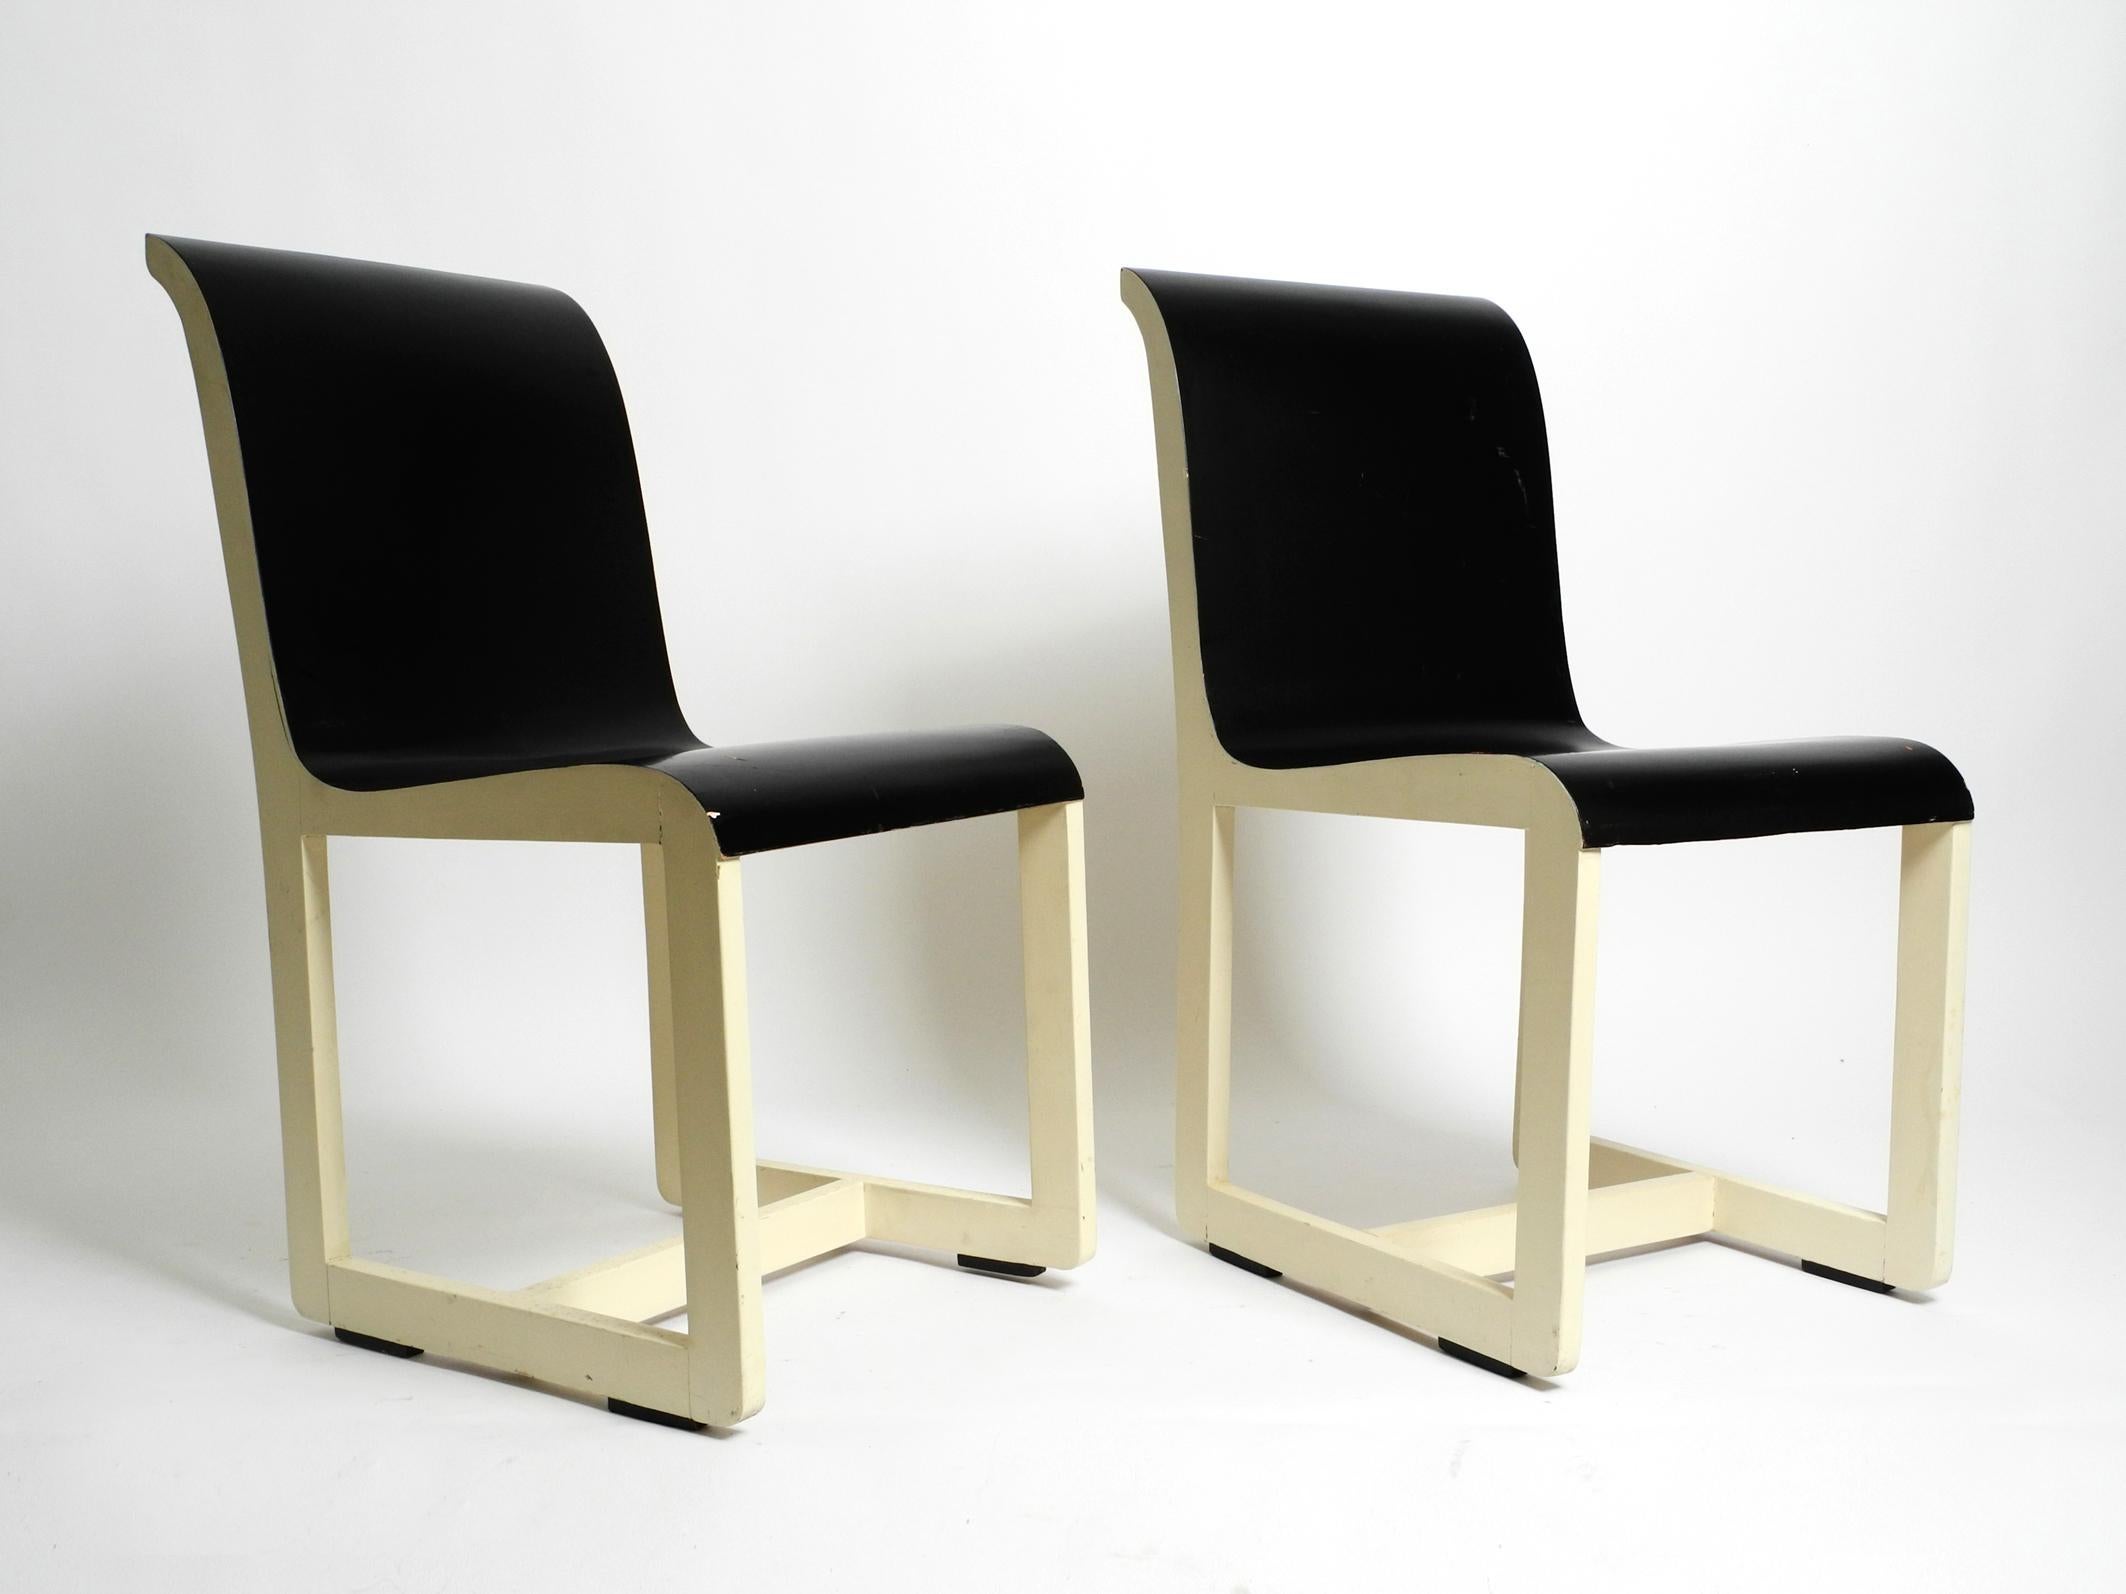 Two original 1930s wooden chairs by the well-known Bauhaus student Peter Keler For Sale 6